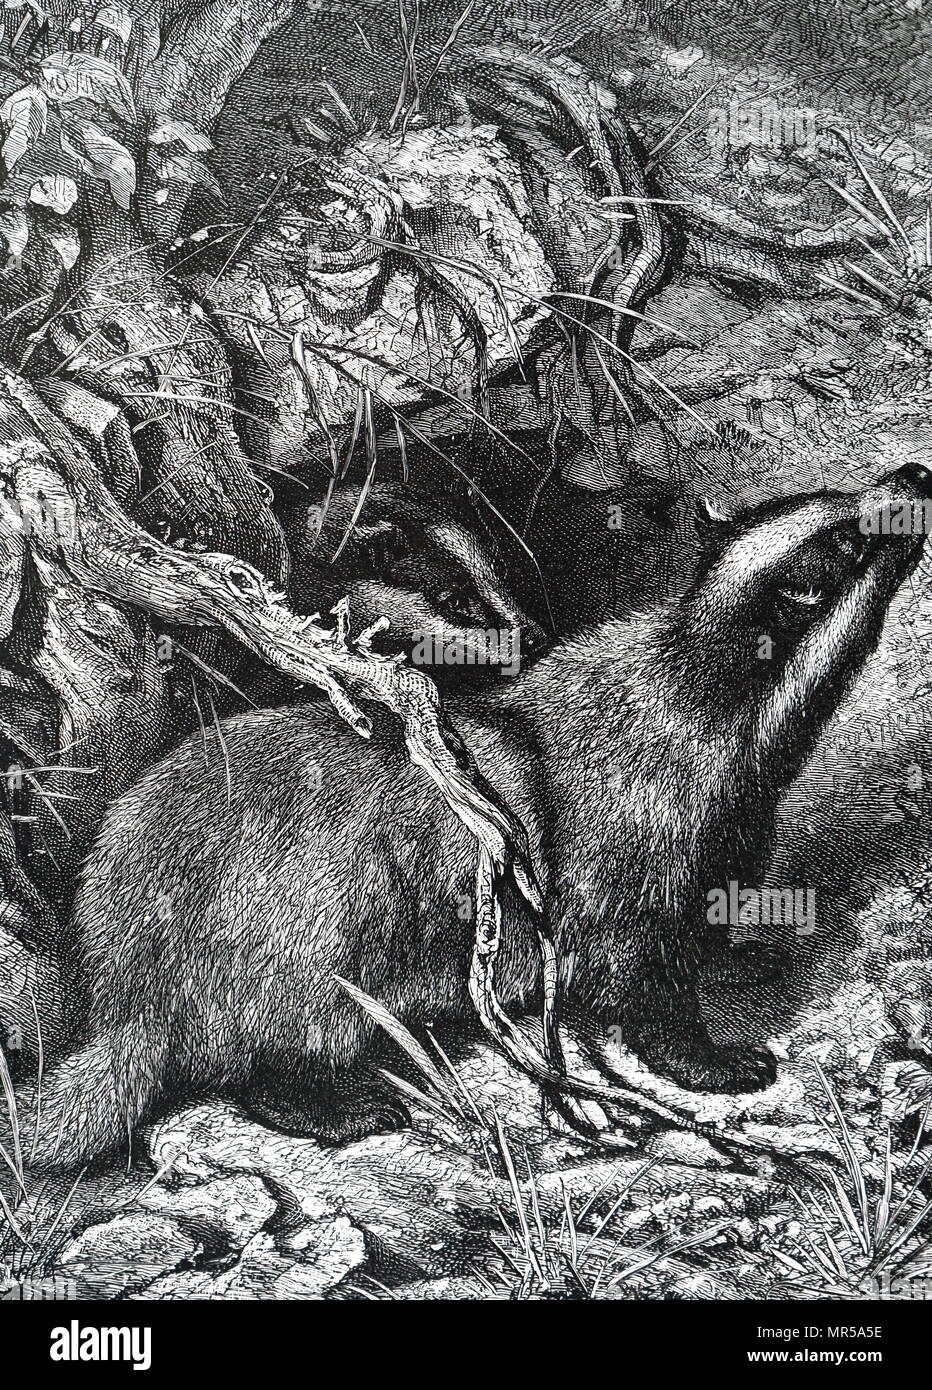 Engraving depicting a badger. Badgers are short-legged omnivores in the family Mustelidae, which also includes the otters, polecats, weasels, and wolverines. Dated 19th century Stock Photo